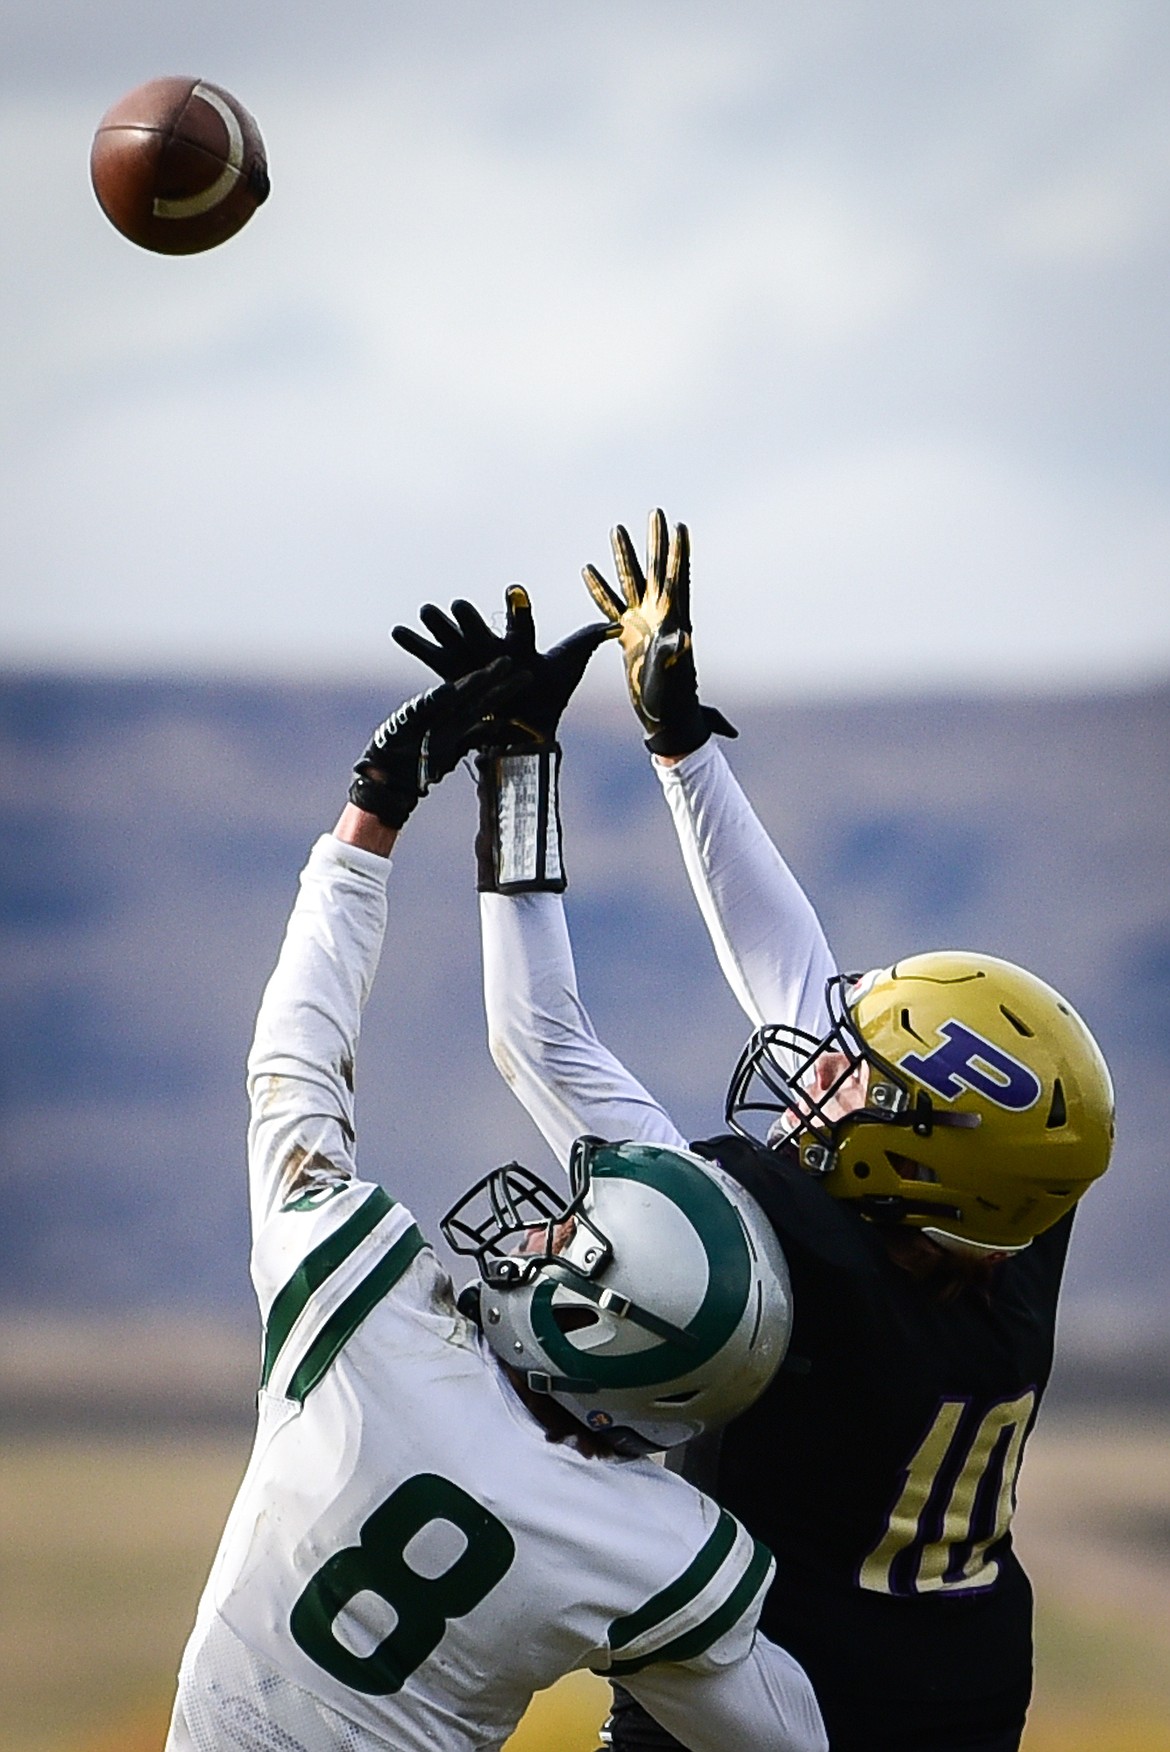 Polson wide receiver Colton Graham (10) catches a touchdown pass in the fourth quarter over Billings Central defender Travis Hadley (8) at Polson High School on Saturday, Nov. 6. (Casey Kreider/Daily Inter Lake)